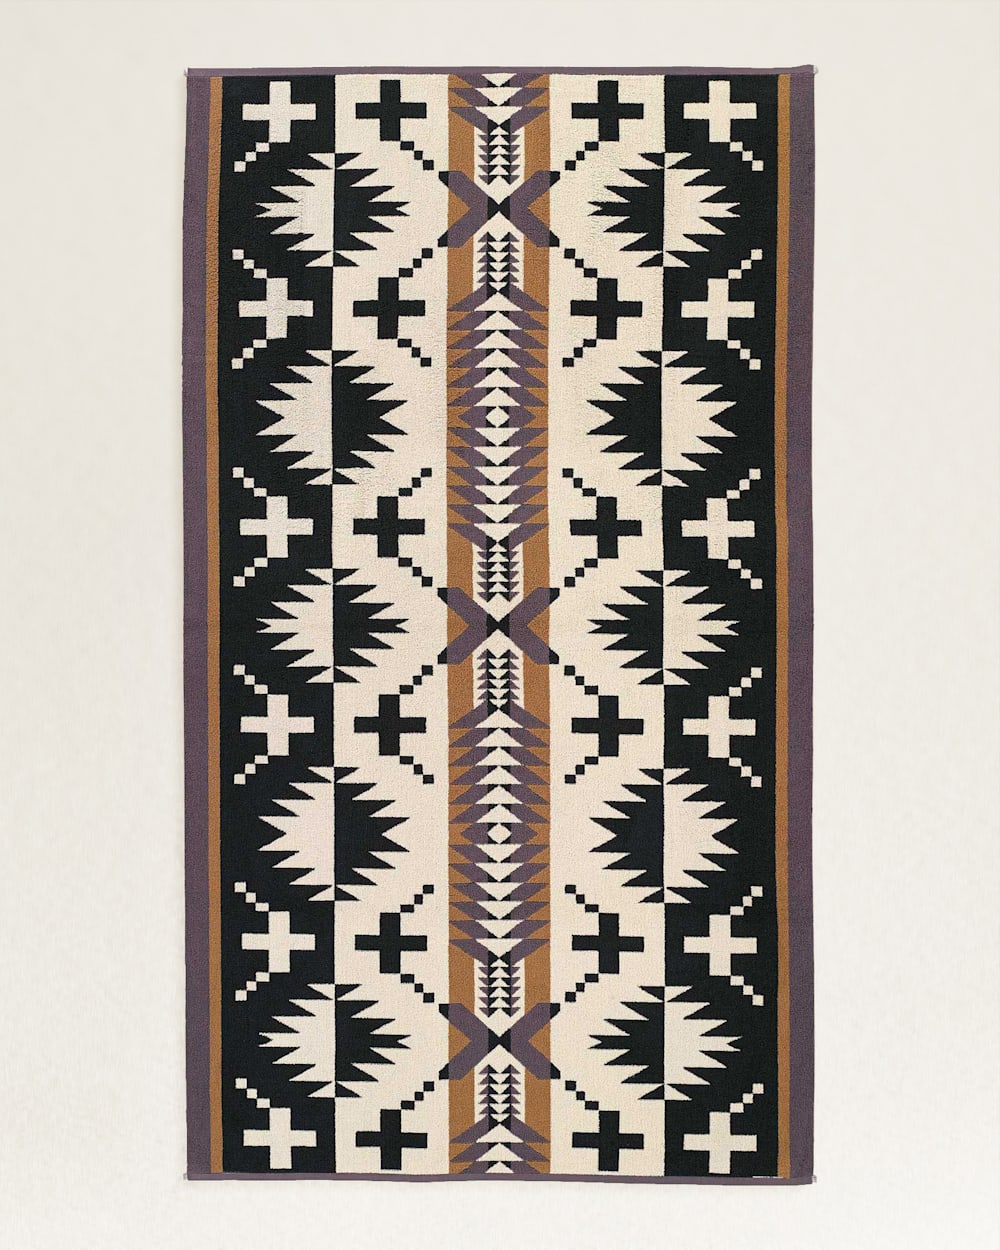 A traditional woven rug featuring a symmetrical geometric pattern with black, white, and tan colors, displayed against a neutral background in a Scottsdale Arizona bungalow by Pendleton/Babblitt's Wholesale.